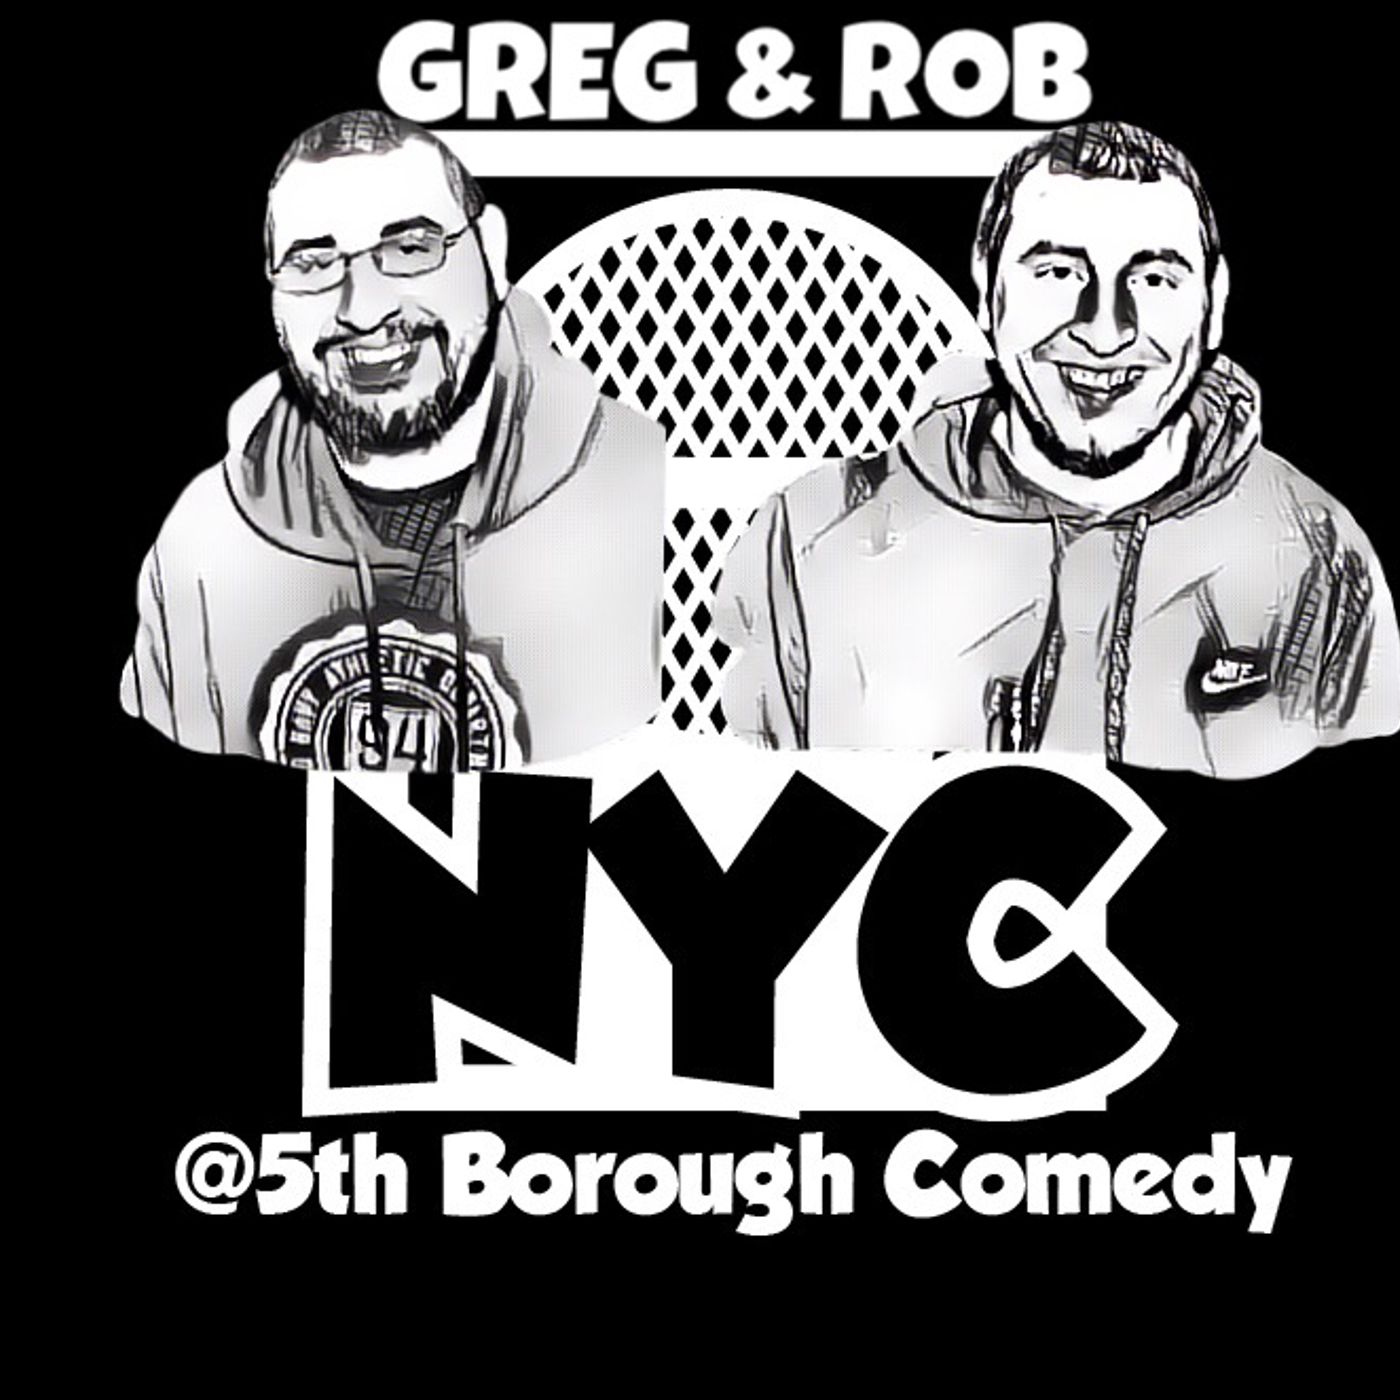 The Greg and Rob Podcast